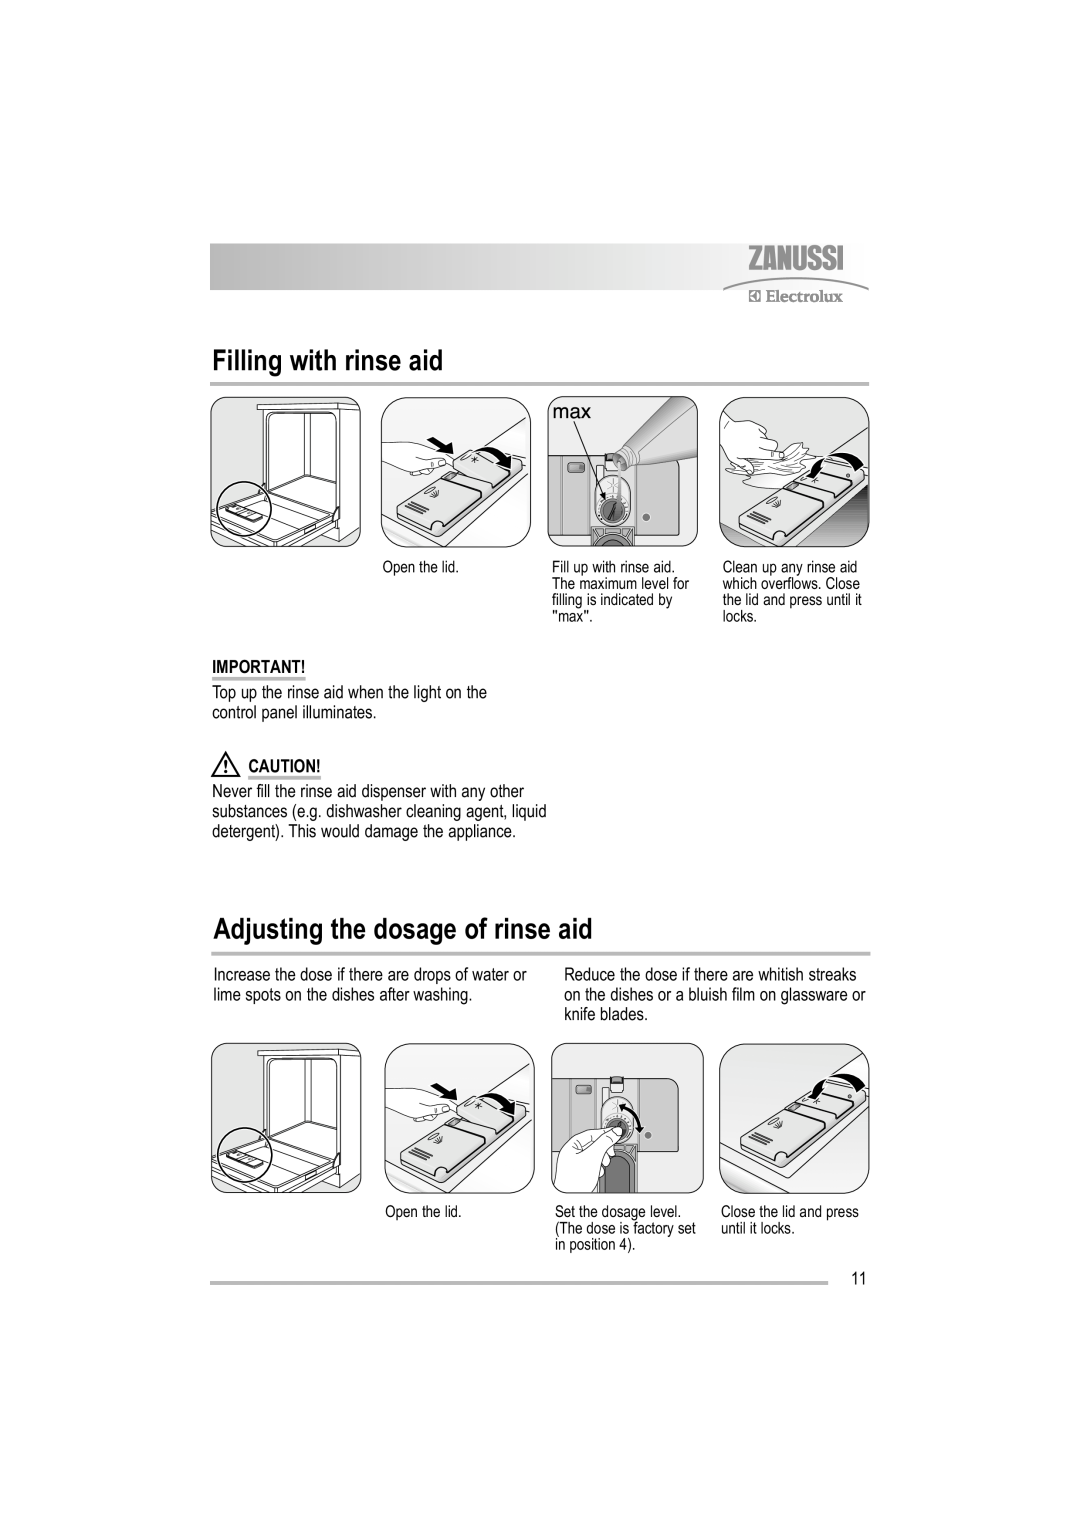 Zanussi ZDF 221 user manual Filling with rinse aid, Adjusting the dosage of rinse aid 